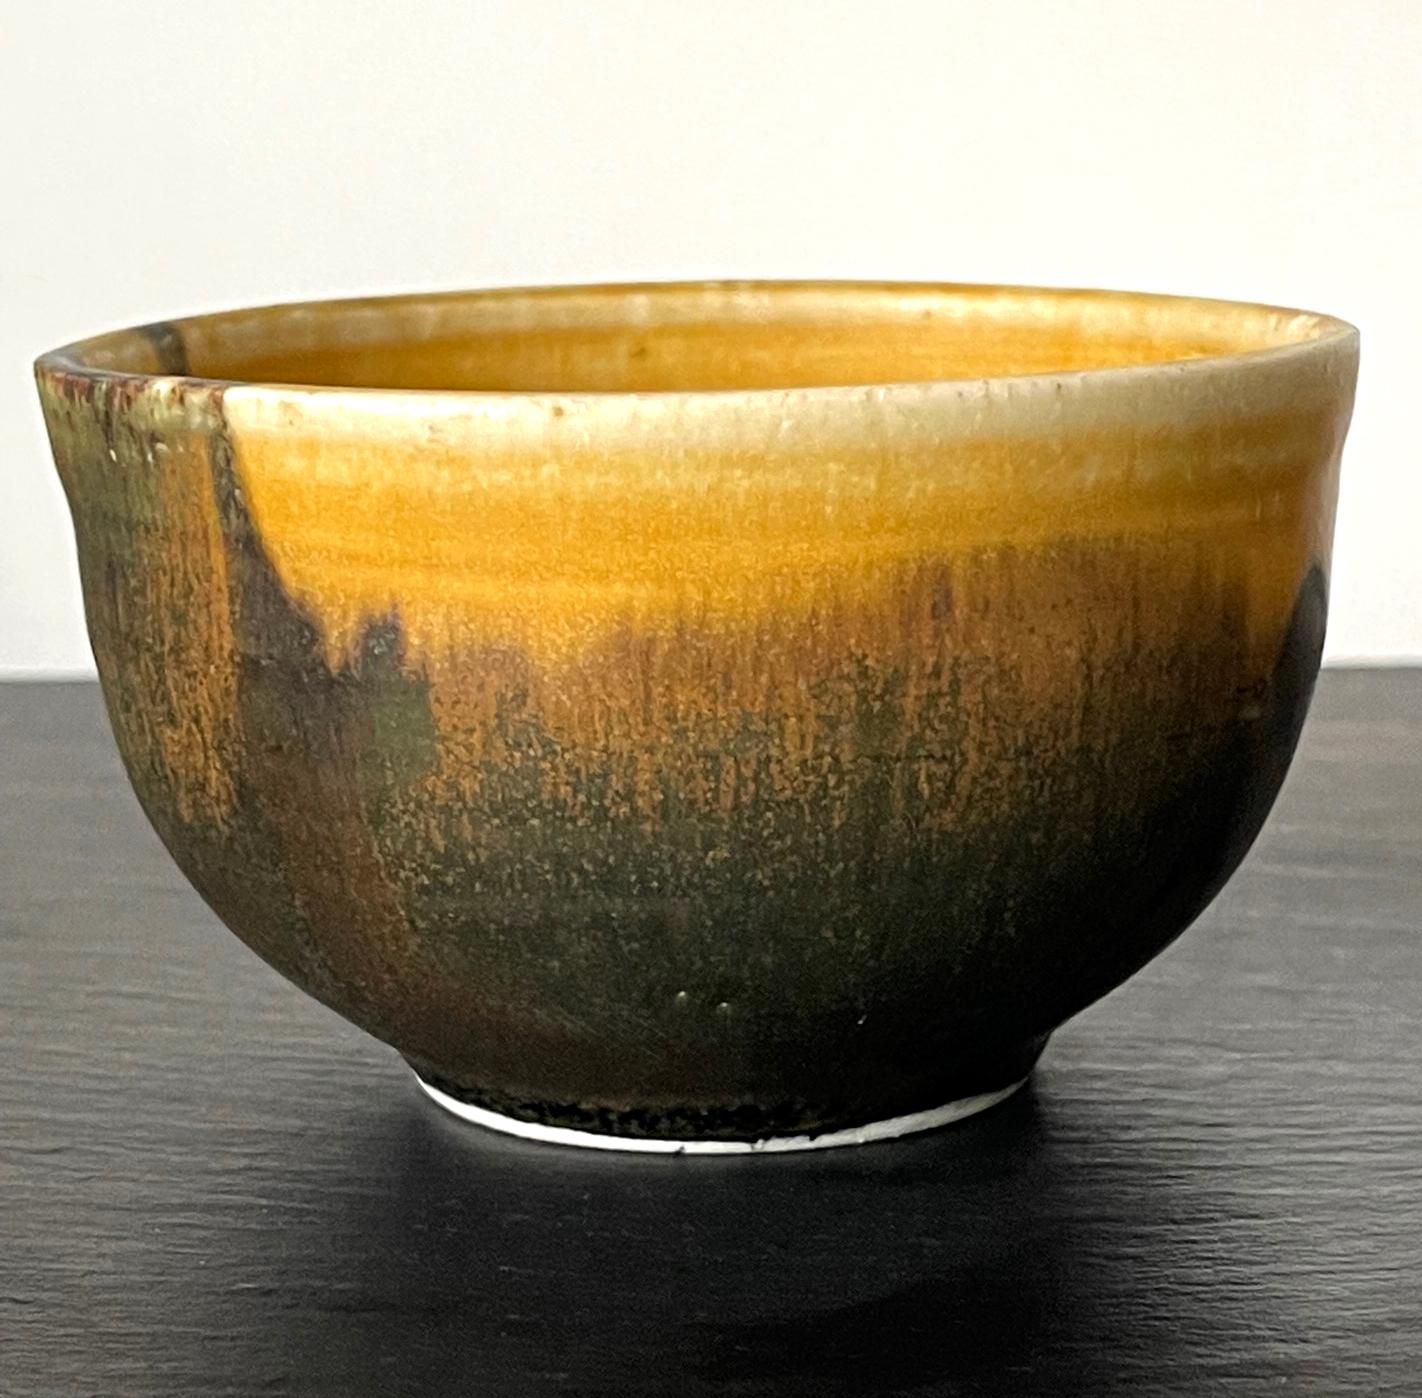 A ceramic tea bowl (chawan) by Japanese American artist Toshiko Takaezu (American, 1922 - 2011). In a classic chawan form, this small tea bowl strikes the viewer with its beautifully applied glaze. On its golden-ochre background, an ink like black